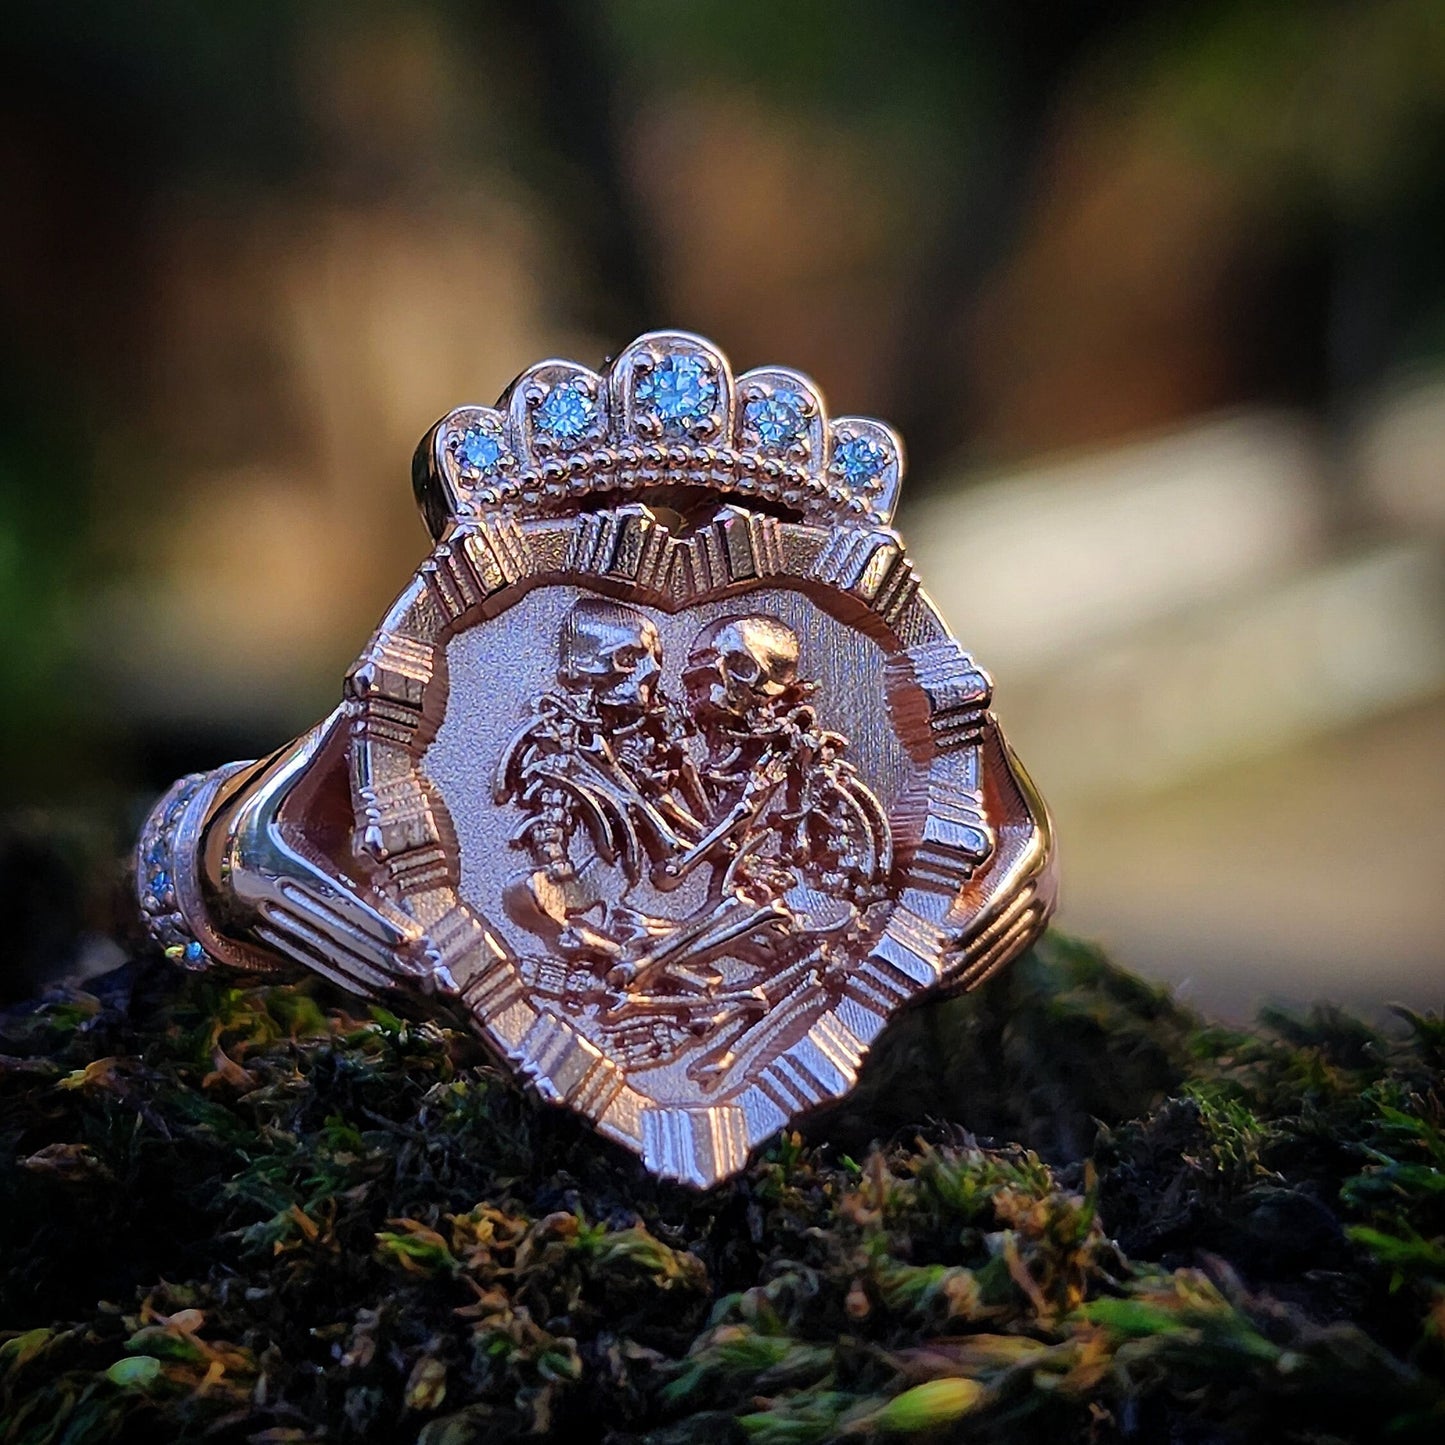 Game of Bones - Lovers of Valdaro Claddagh Fede Victorian Inspired Memento Mori Skeleton Ring with Diamond Crown and Cuffs - Drawlloween